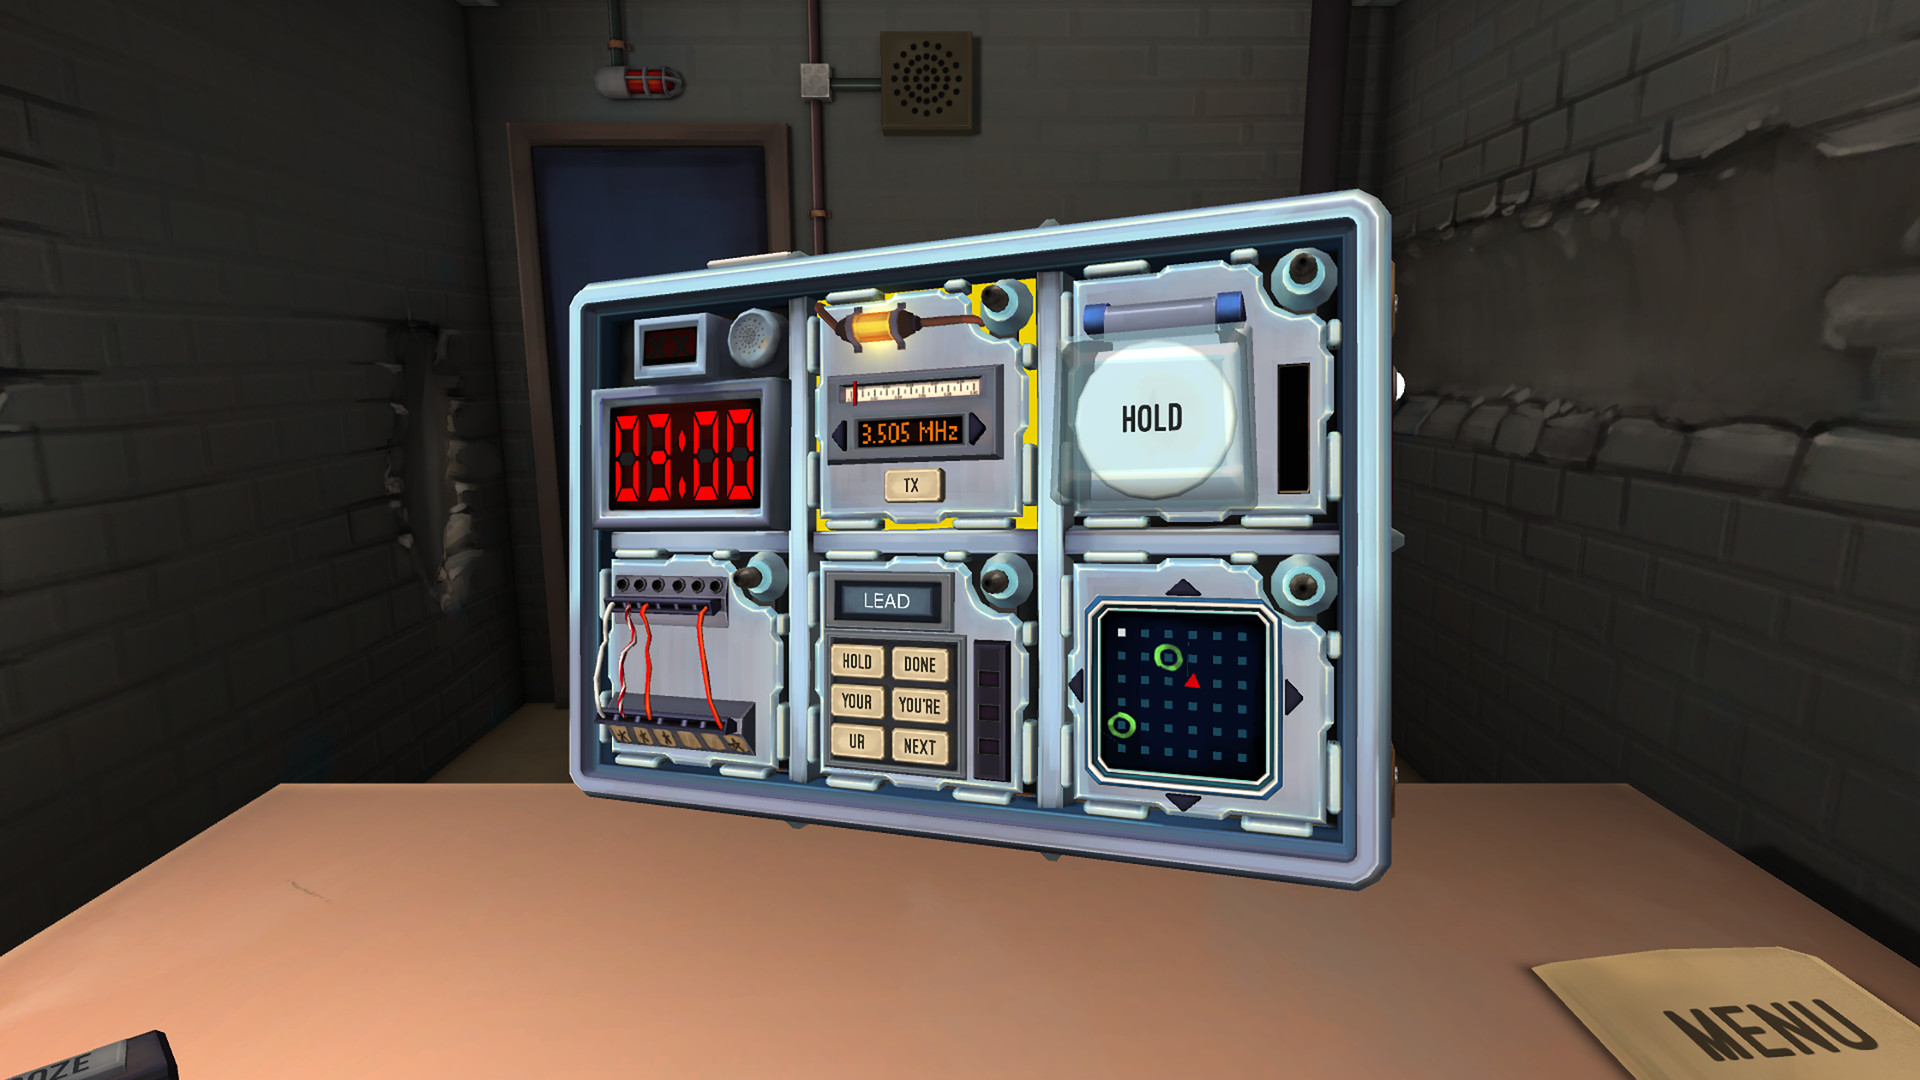 Oculus Quest 游戏《Keep Talking and Nobody Explodes》保持通话